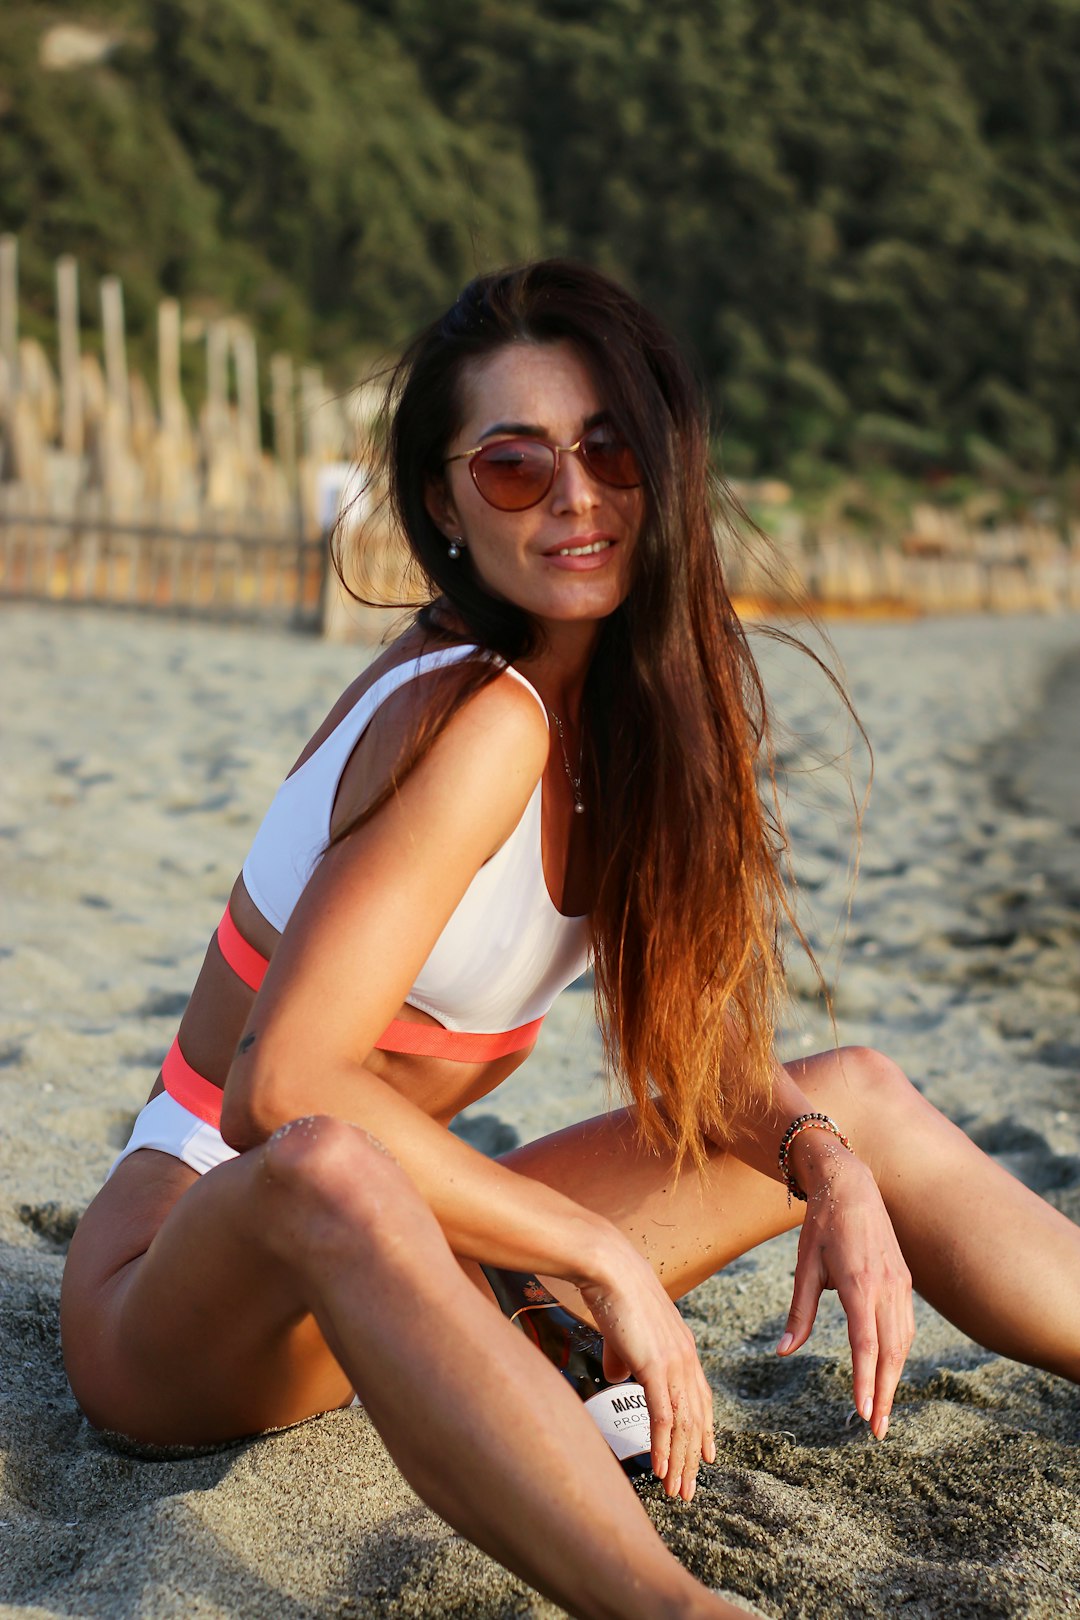 woman in white and red tank top sitting on brown wooden bench during daytime